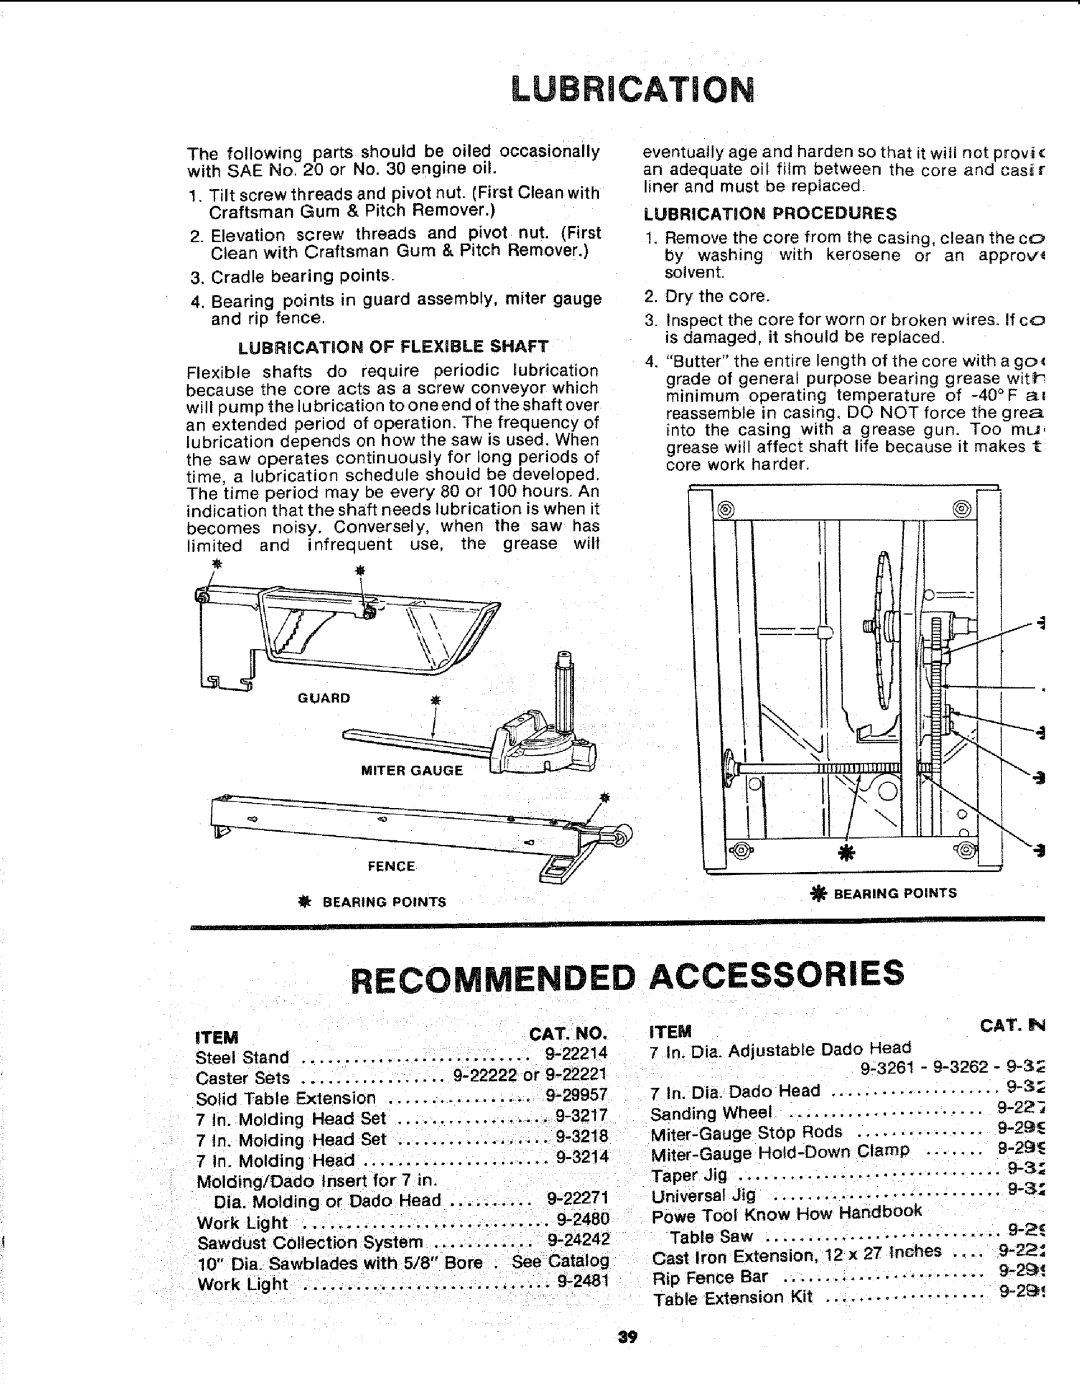 Sears 113.241591 owner manual LUBRiCATiON, Recommended, Accessories, Taper Jig 